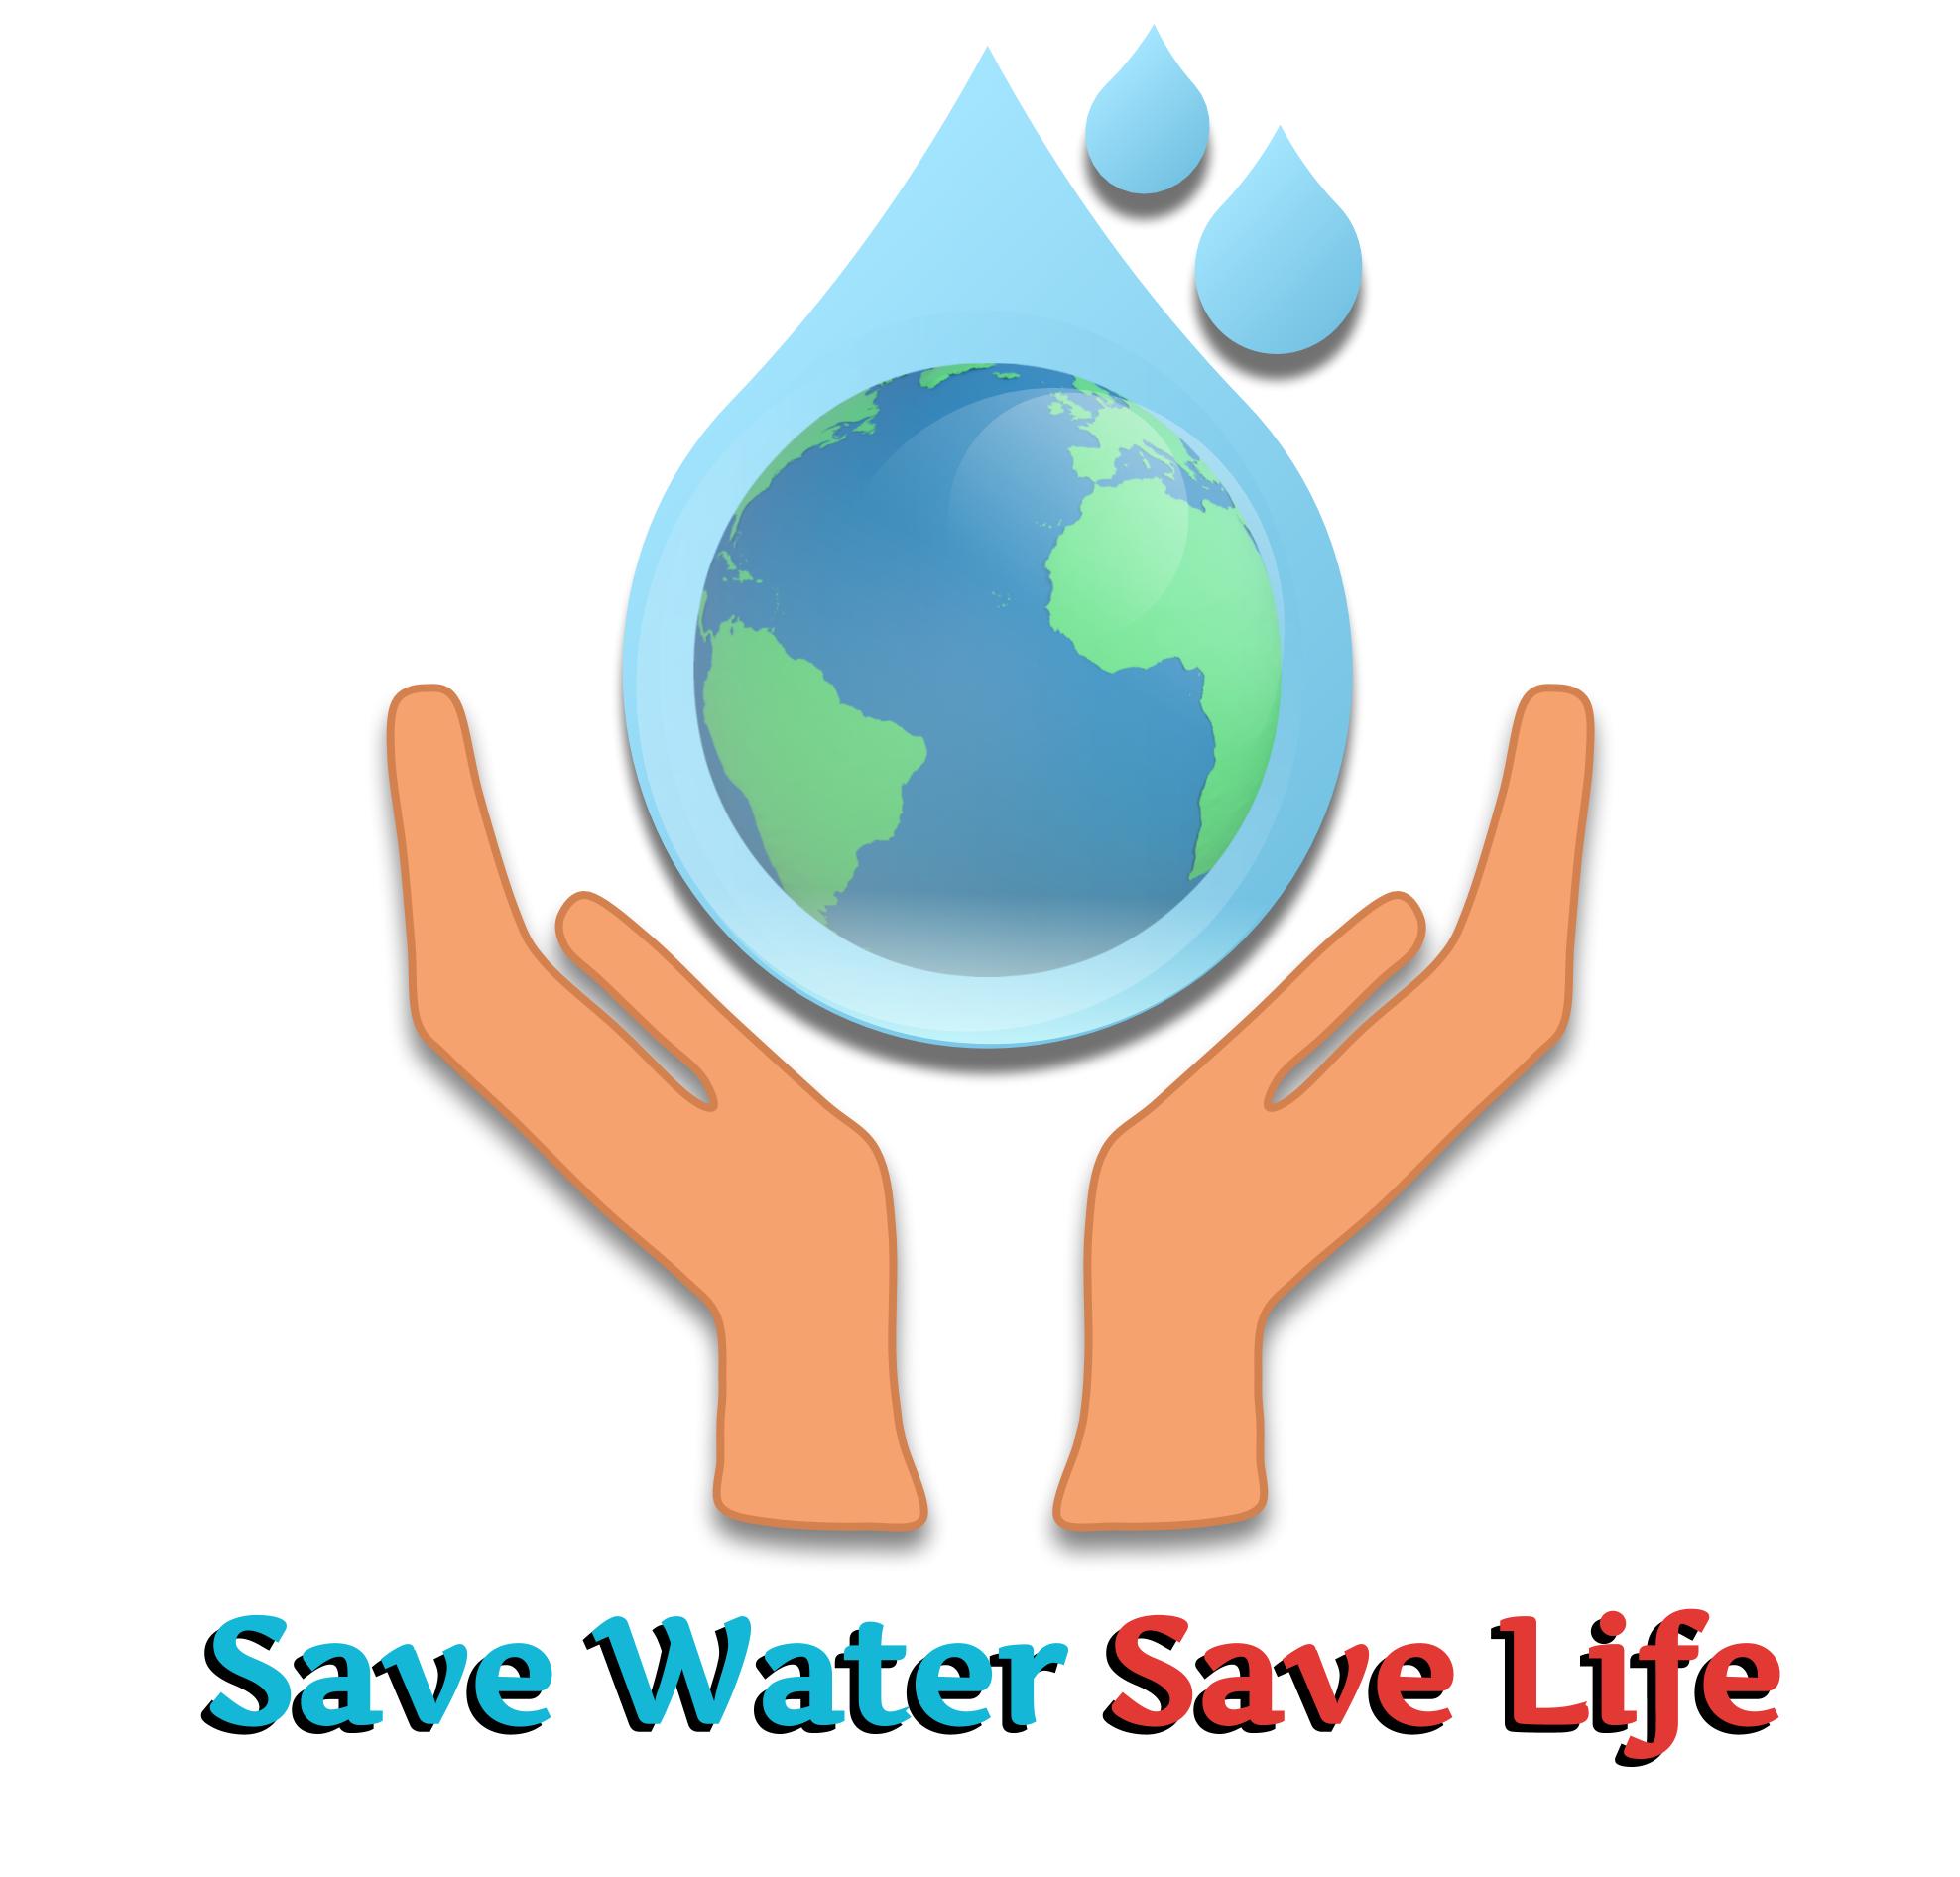 Save water save life (1) - LearnFatafat